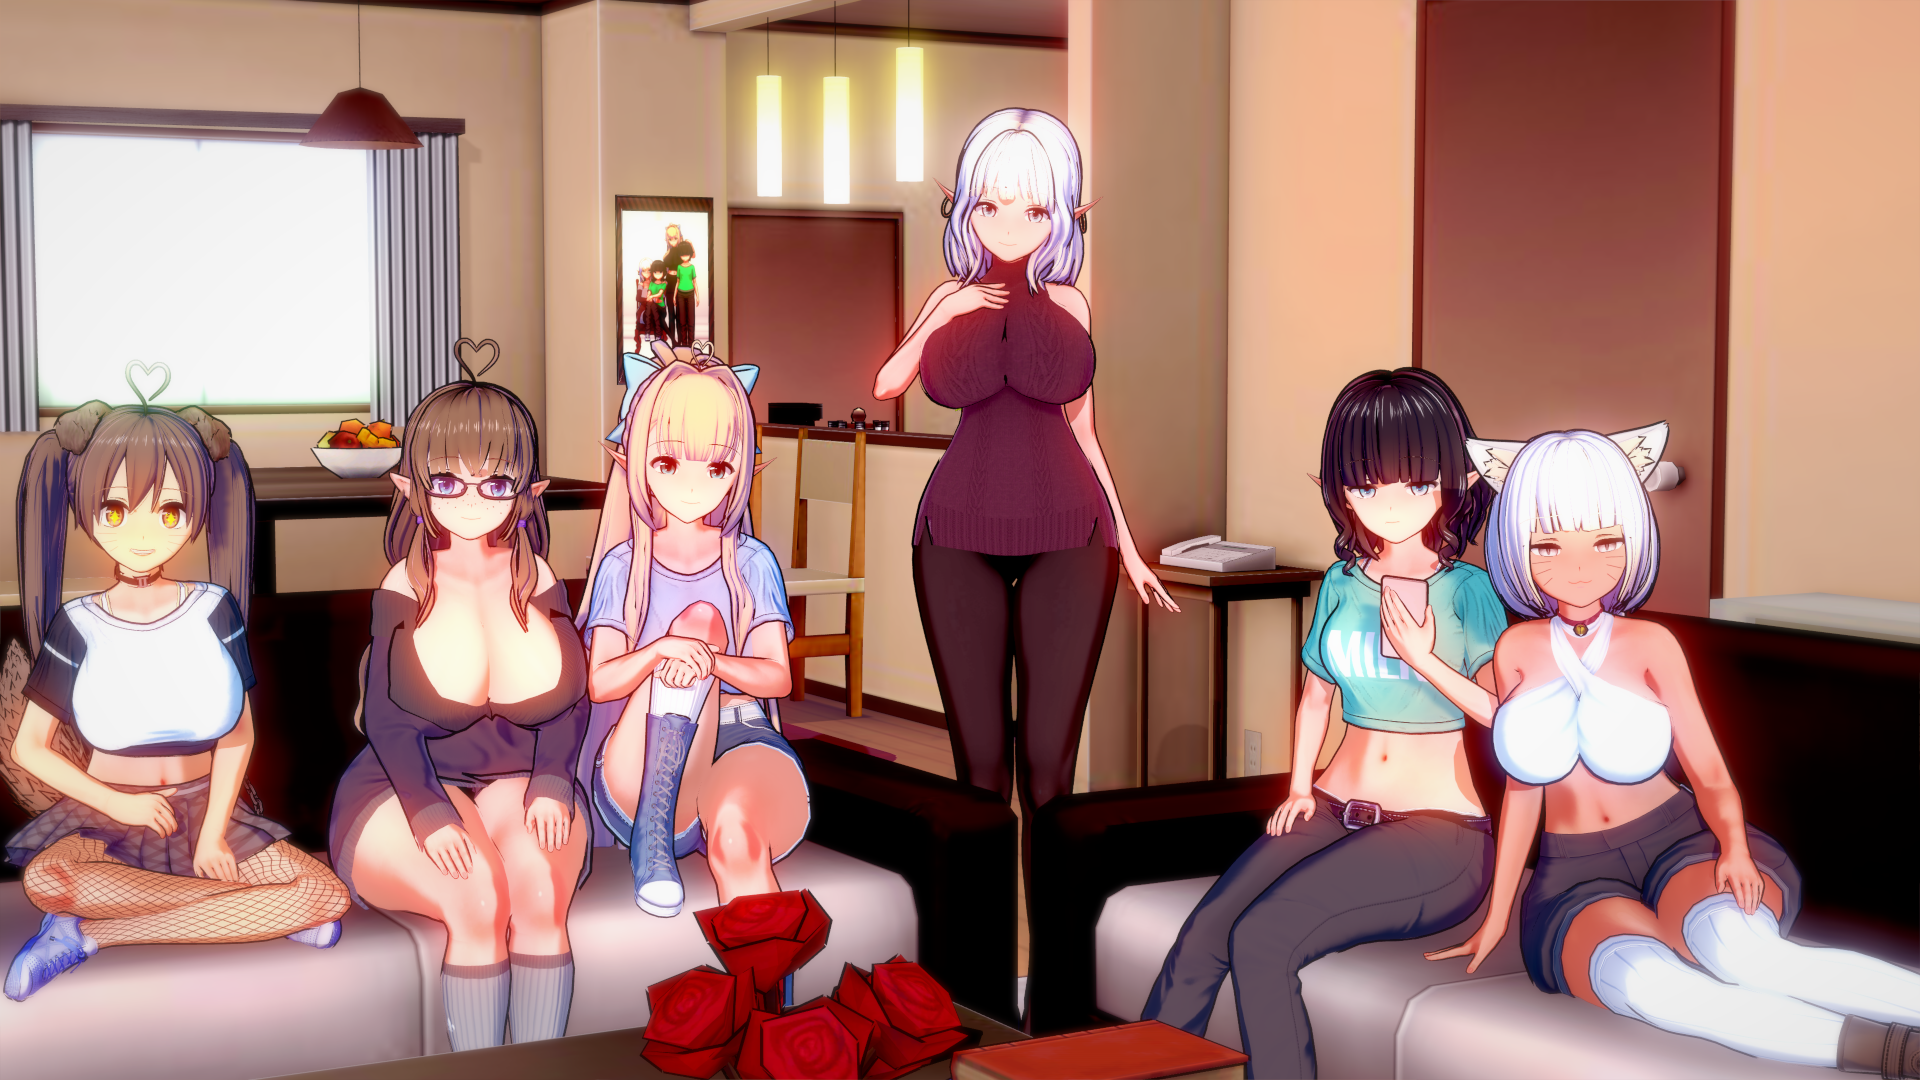 The Perfect Family Picture Porn - Perfect Family - free game download, reviews, mega - xGames